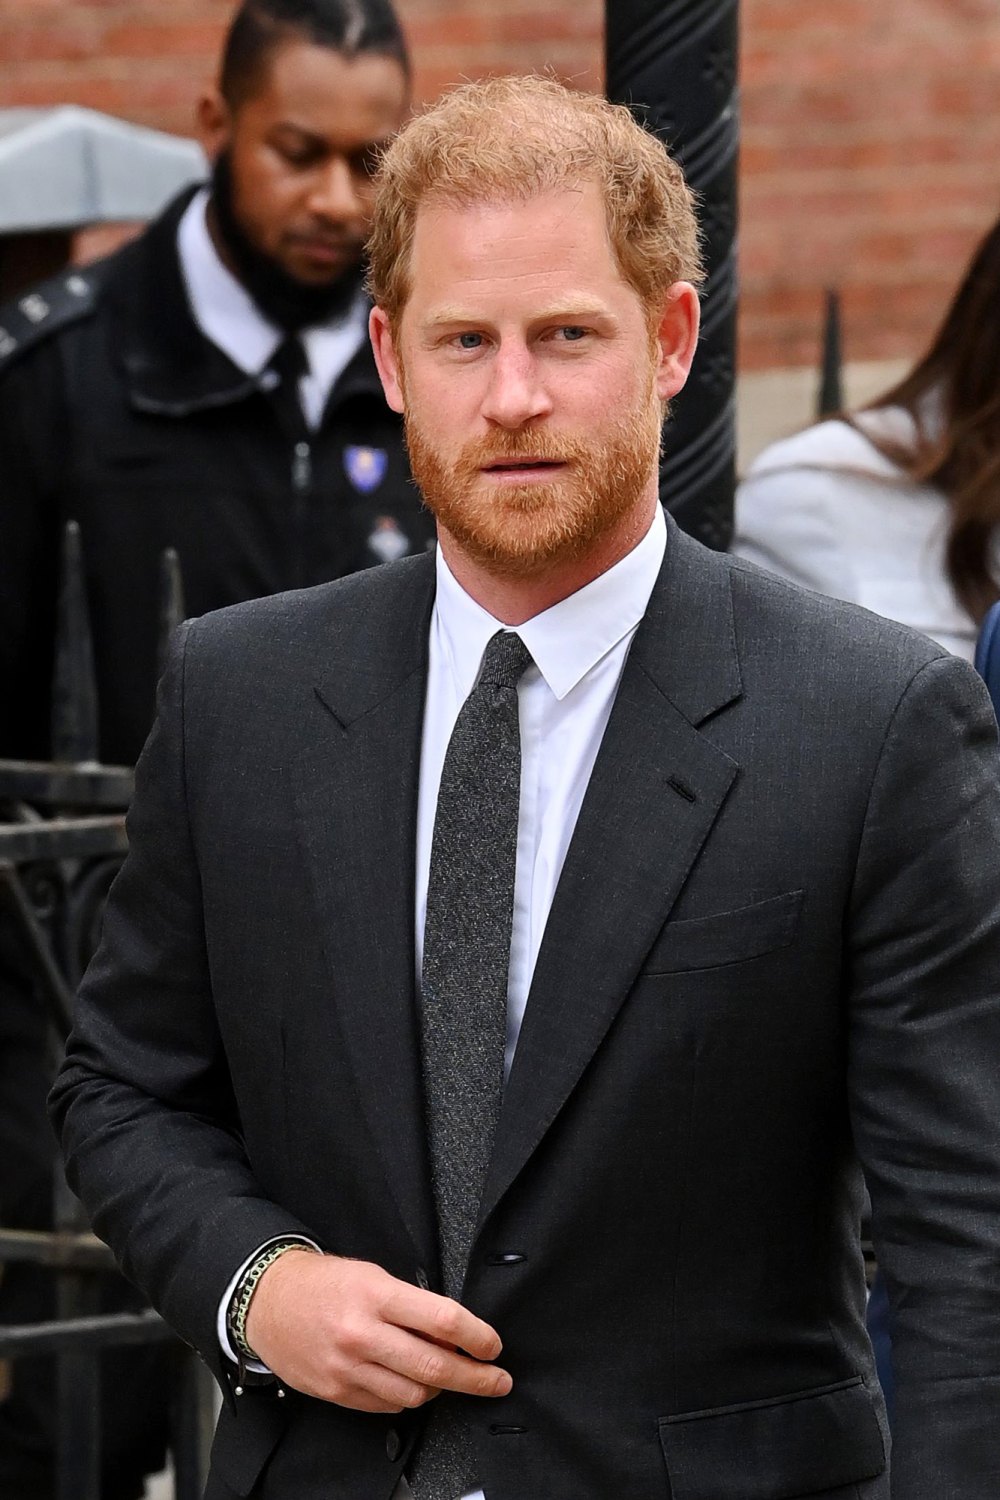 Royal Family Didn t Want to Complicate Matters by Giving Prince Harry a Role in Coronation 062